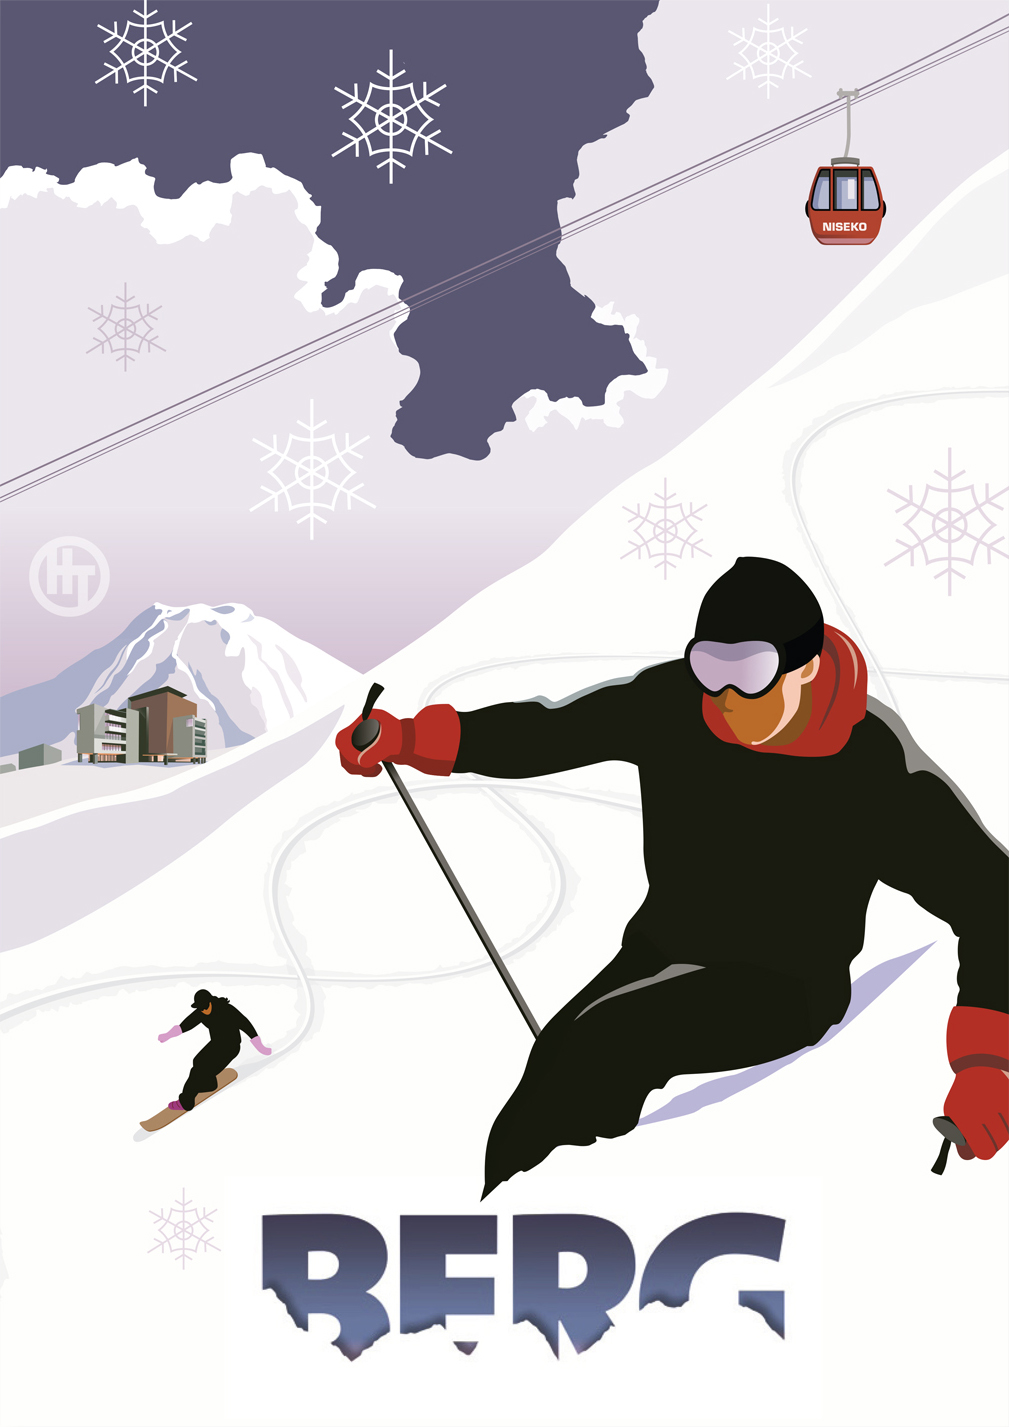   CLIENT: DIALOGUE VISUAL COMMUNICATIONS llustration for Japanese ski resort Berg, located in Niseko. The style of the image referenced 1930's posters. TECHNIQUE: Digital  